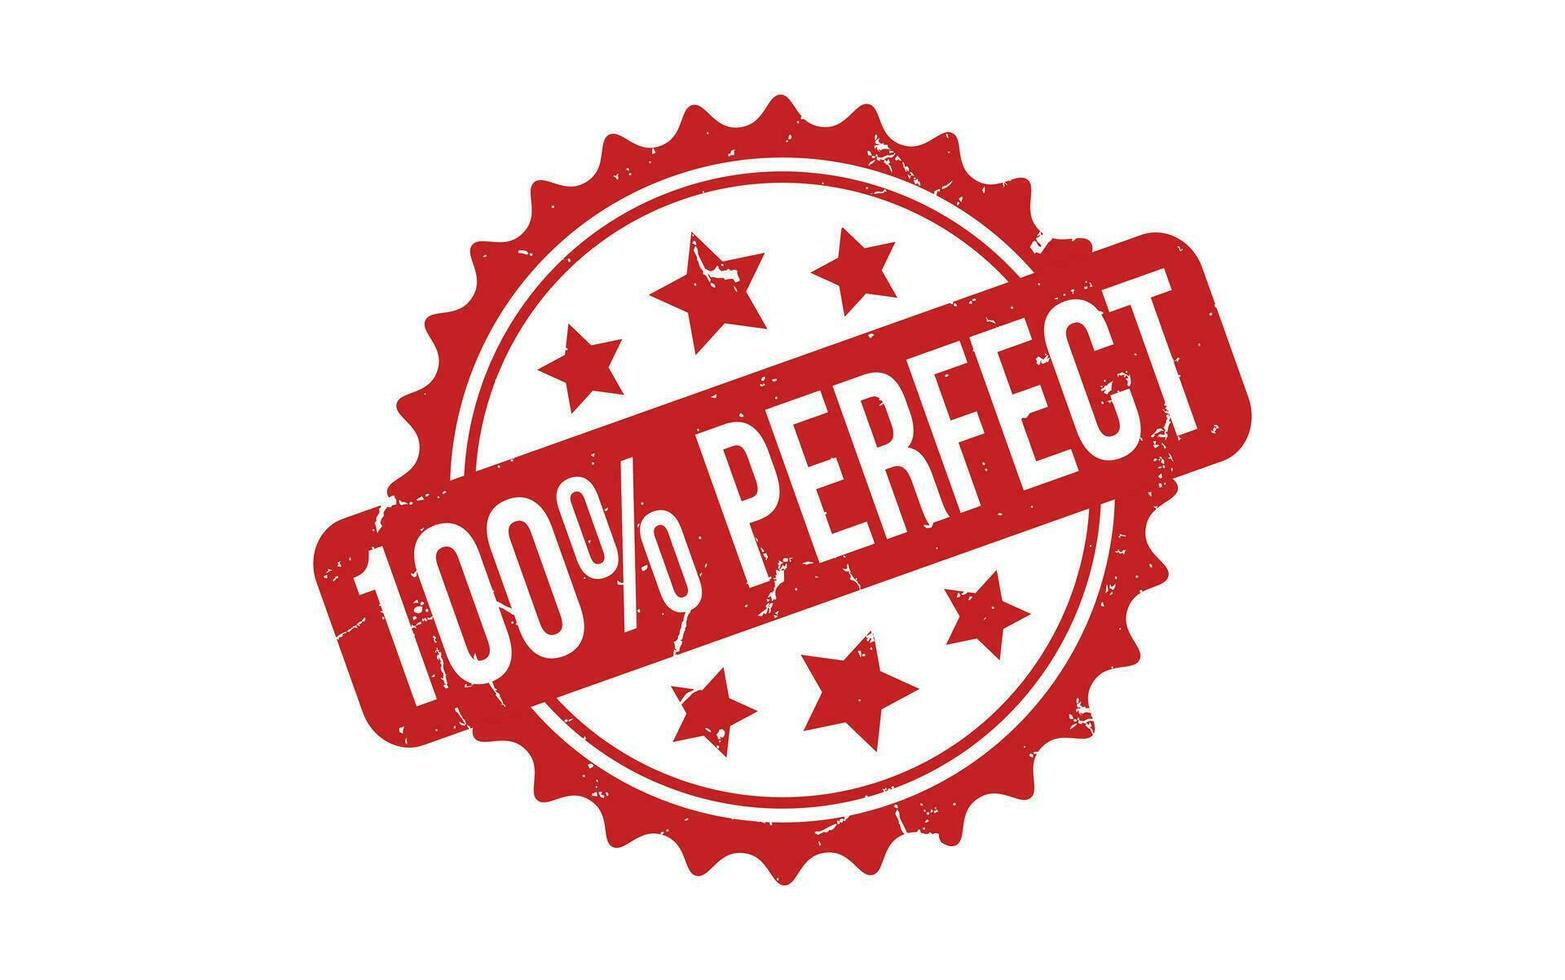 100 Percent Perfect rubber grunge stamp seal vector